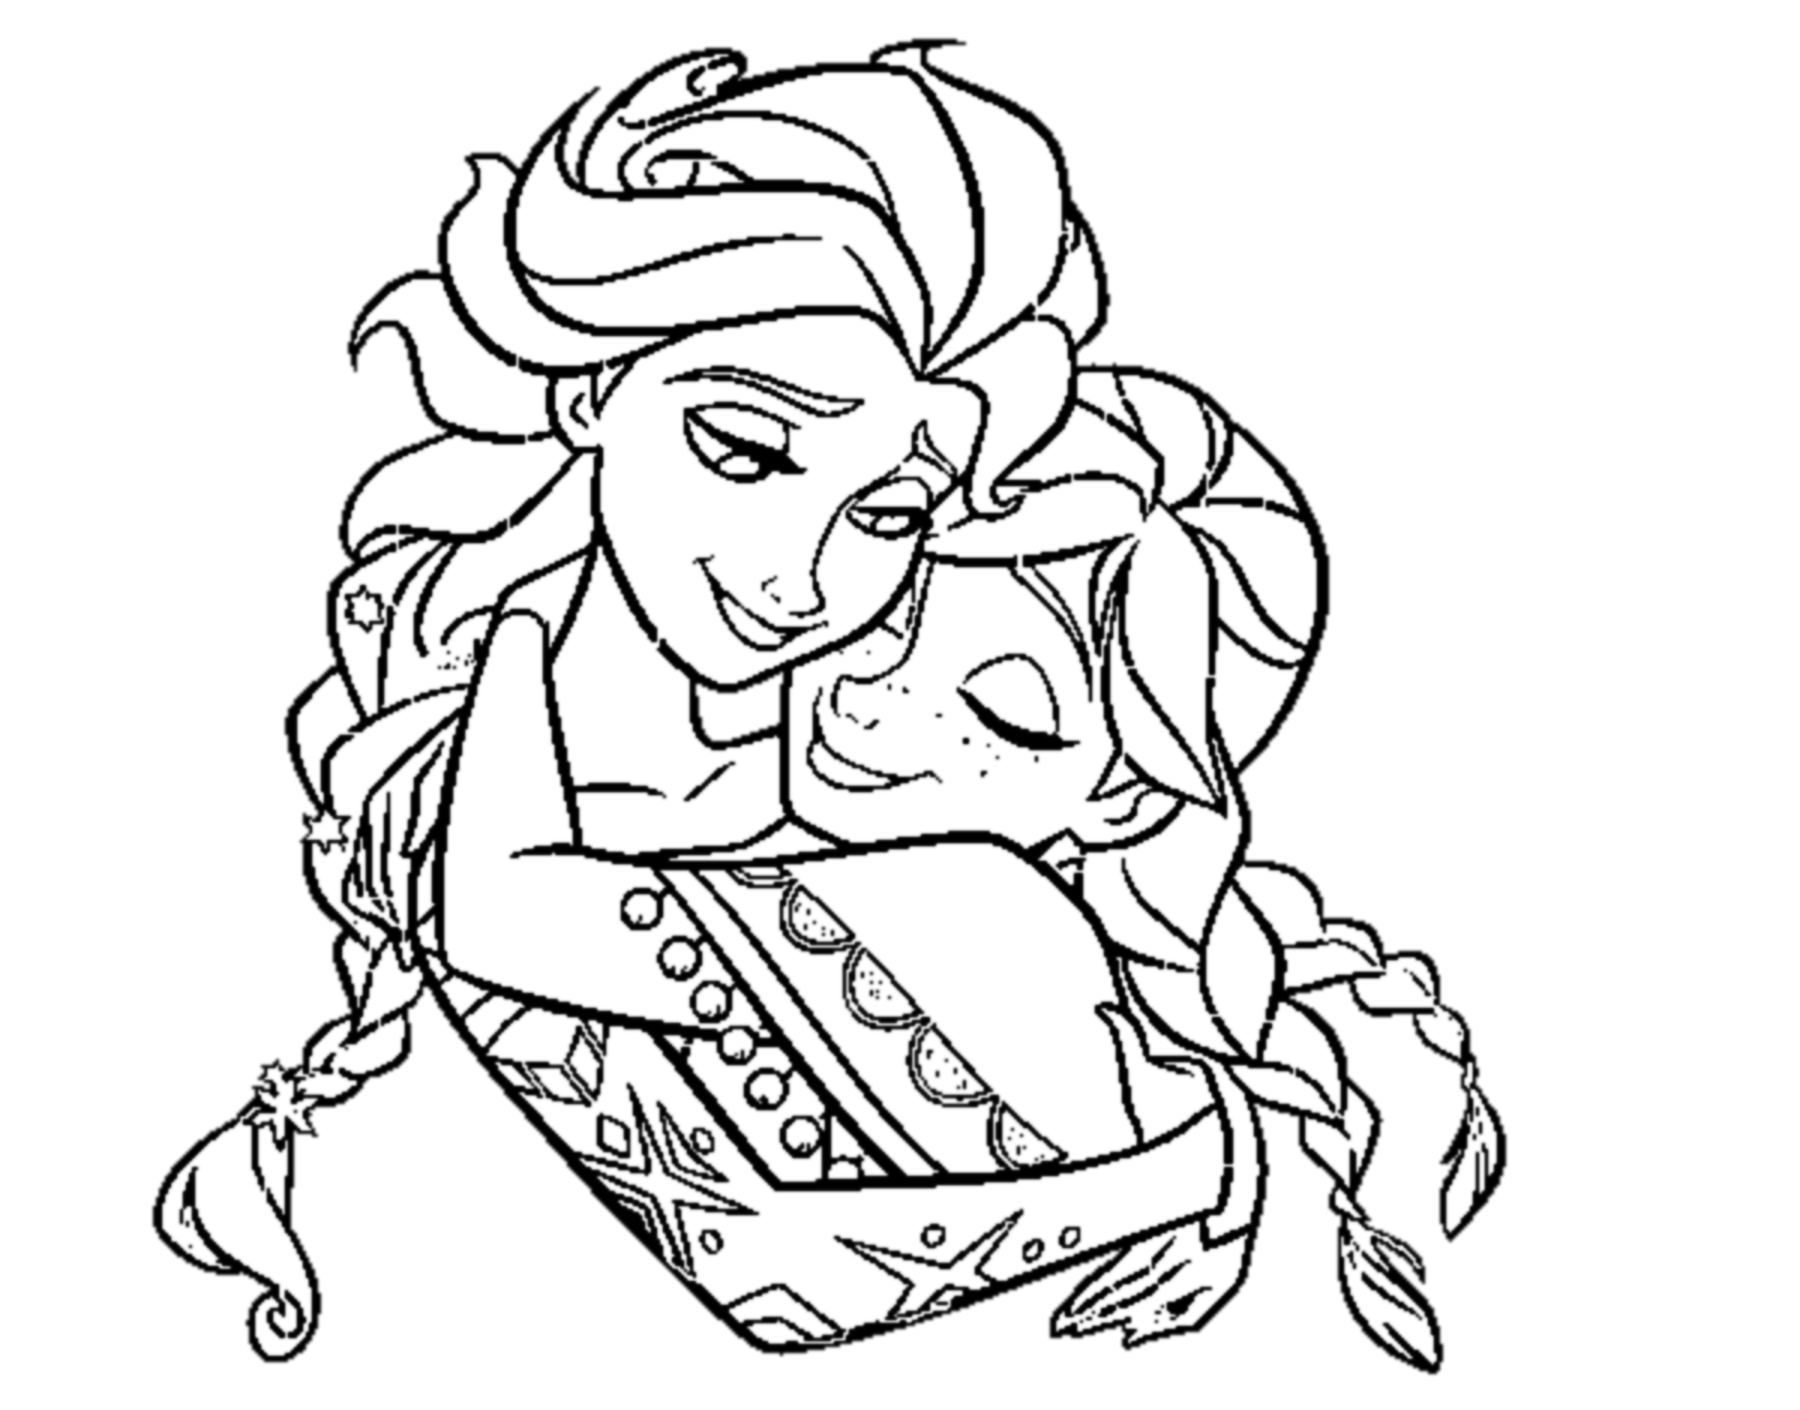 Simple Frozen coloring page to print and color for free : The sisters